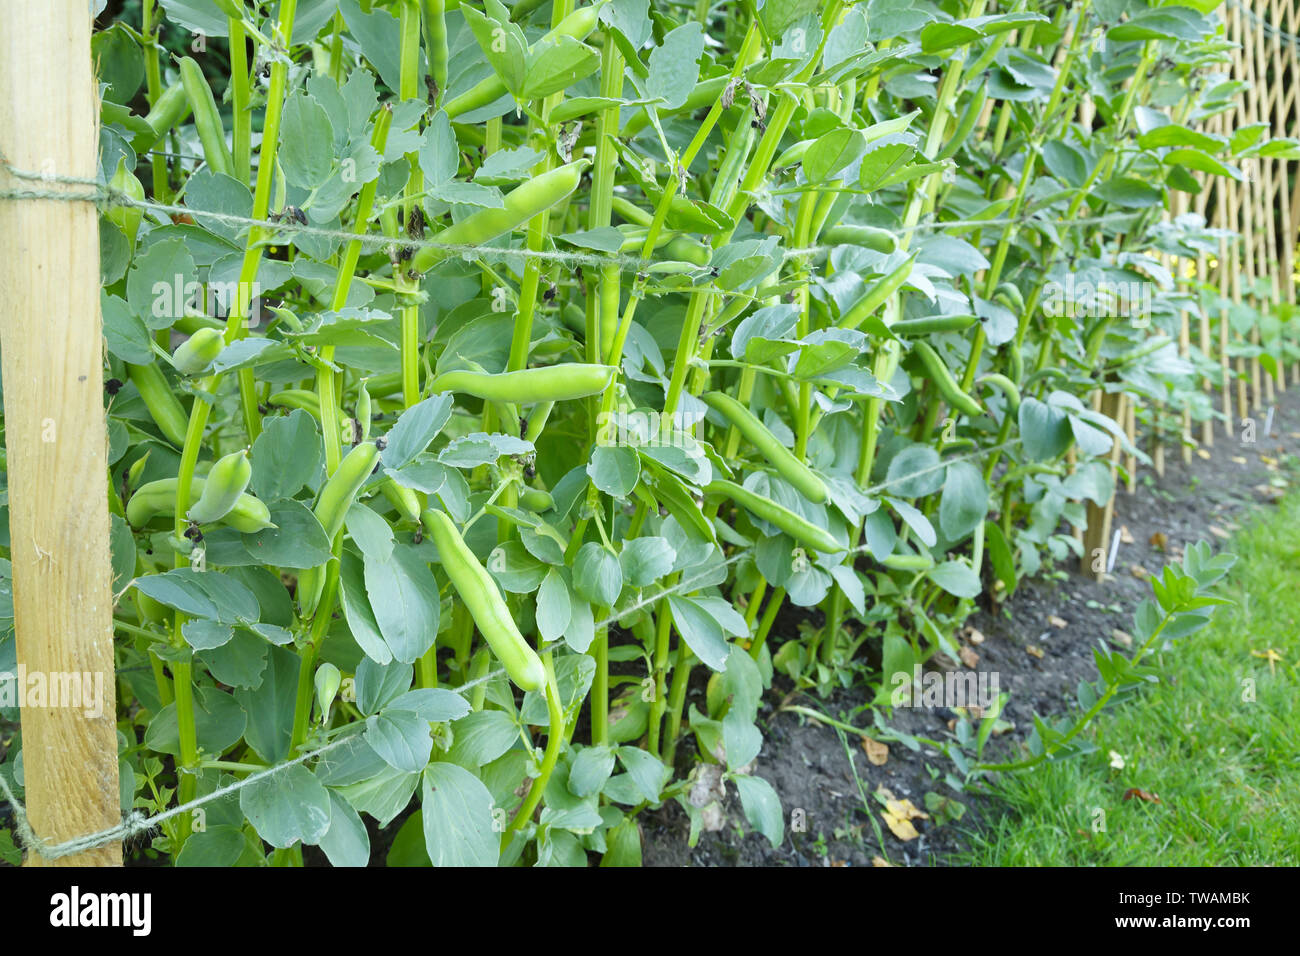 Broad beans or fava beans growing in a vegetable garden Stock Photo